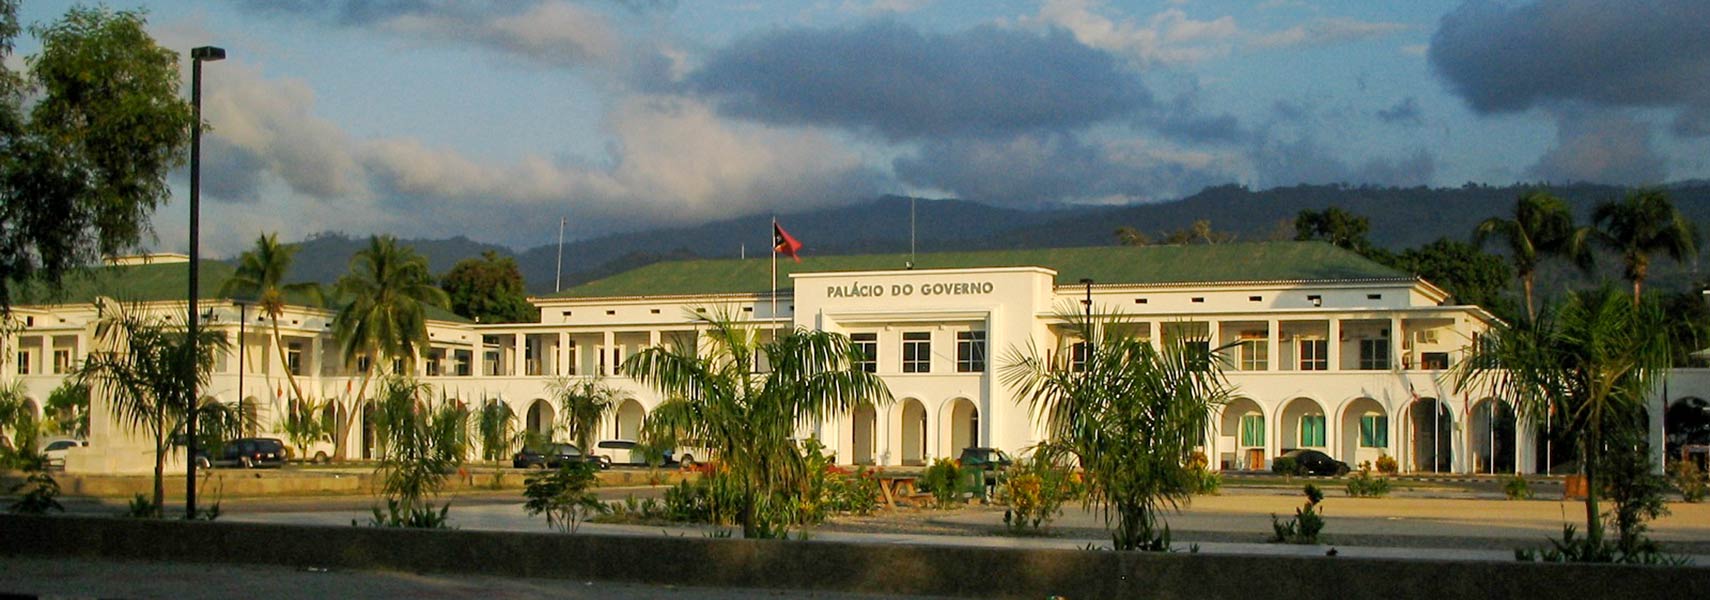 Government's Palace in Dili